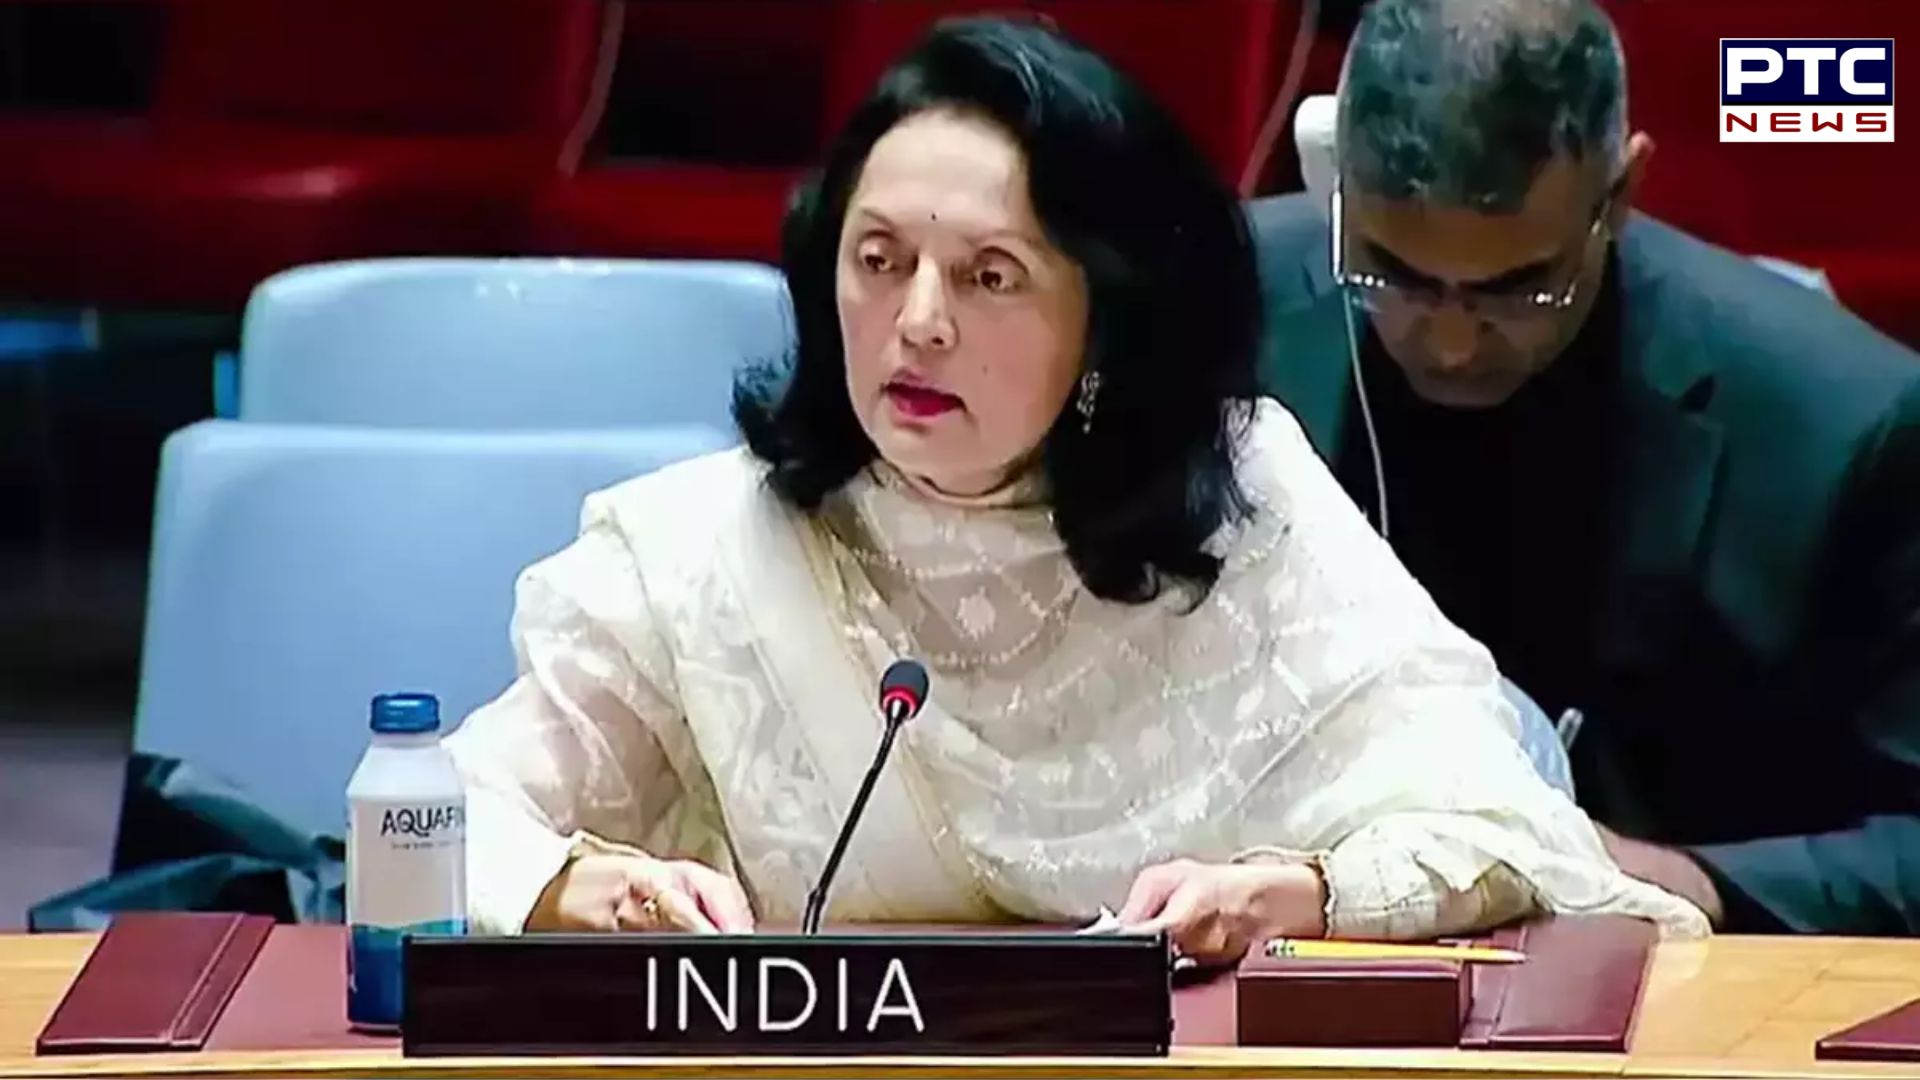 India strongly condemns Veto hindrance of UNSC terrorist listings, calls for transparent reform